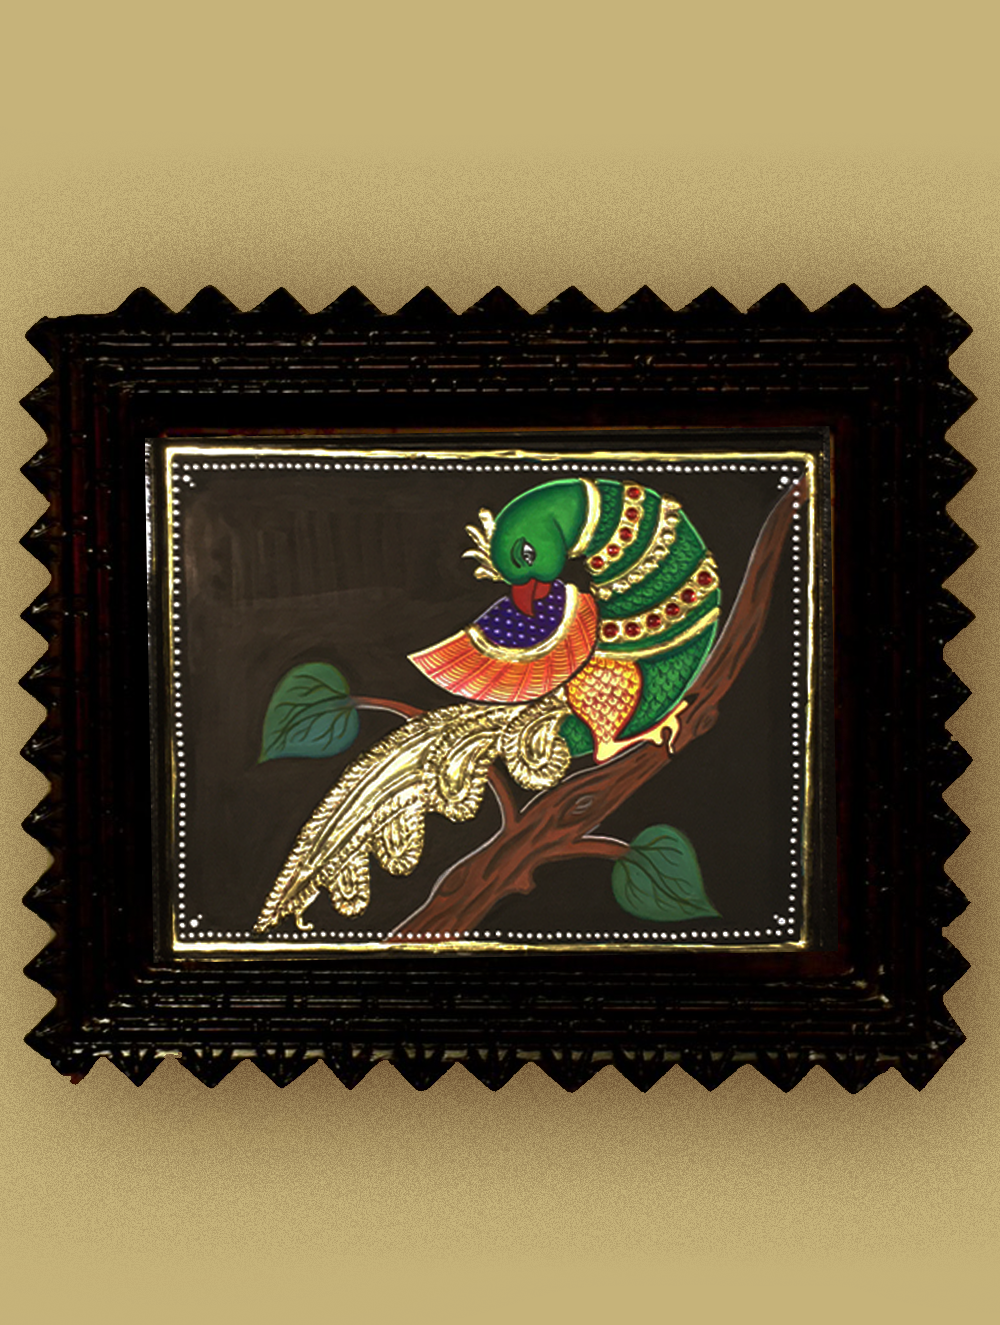 Load image into Gallery viewer, Tanjore Painting In Chettinad Frame - Parrot